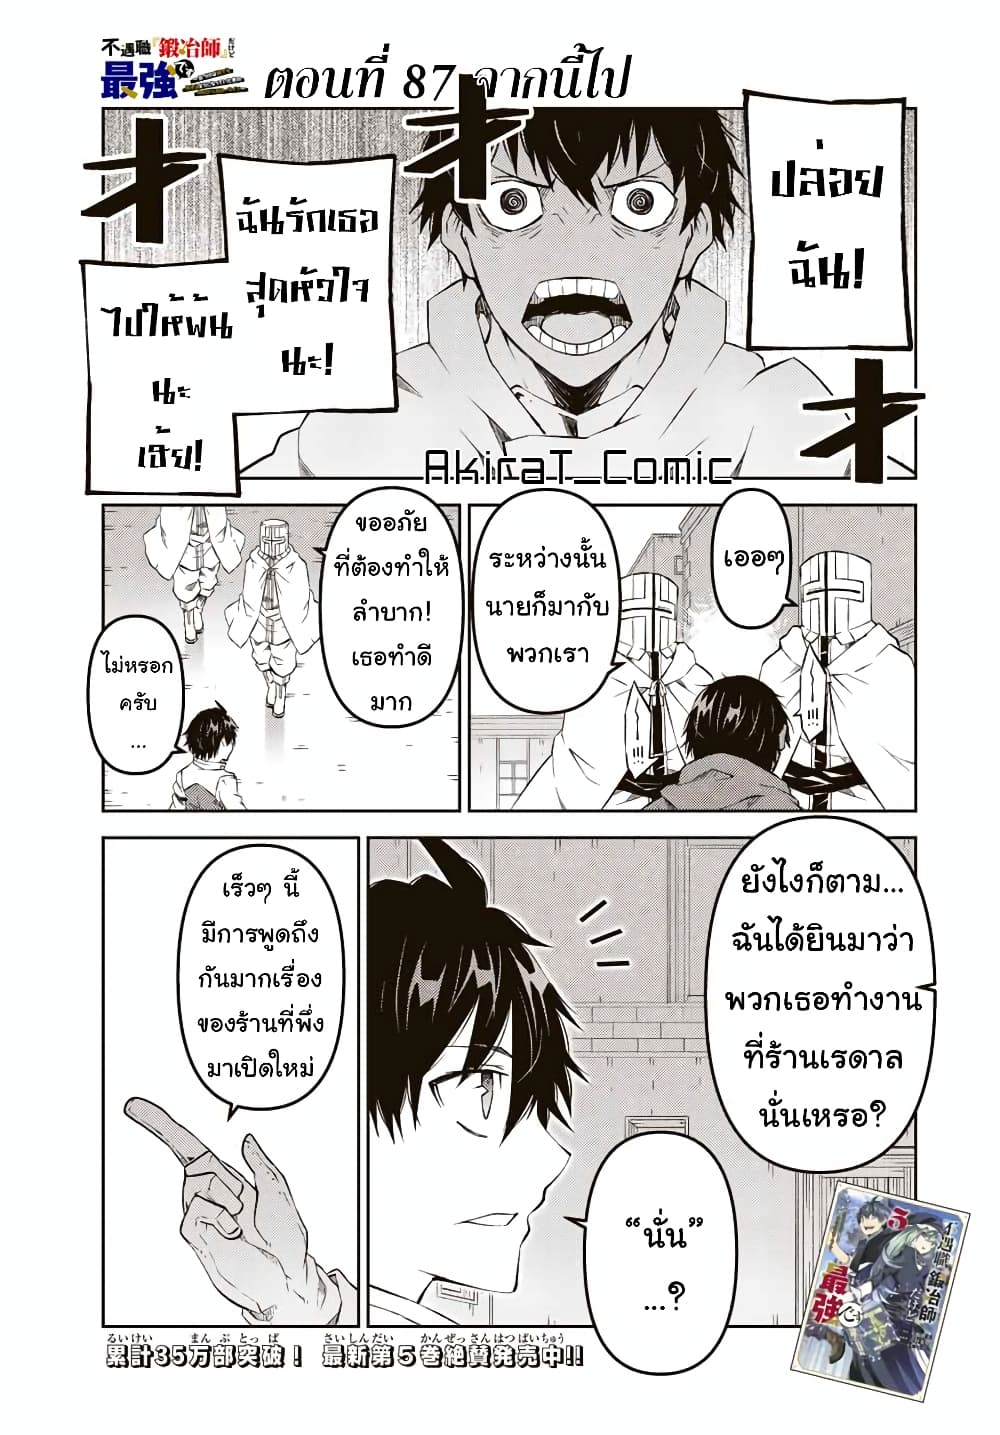 The Weakest Occupation "Blacksmith", but It's Actually the Strongest ช่างตีเหล็กอาชีพกระจอก? 87-87